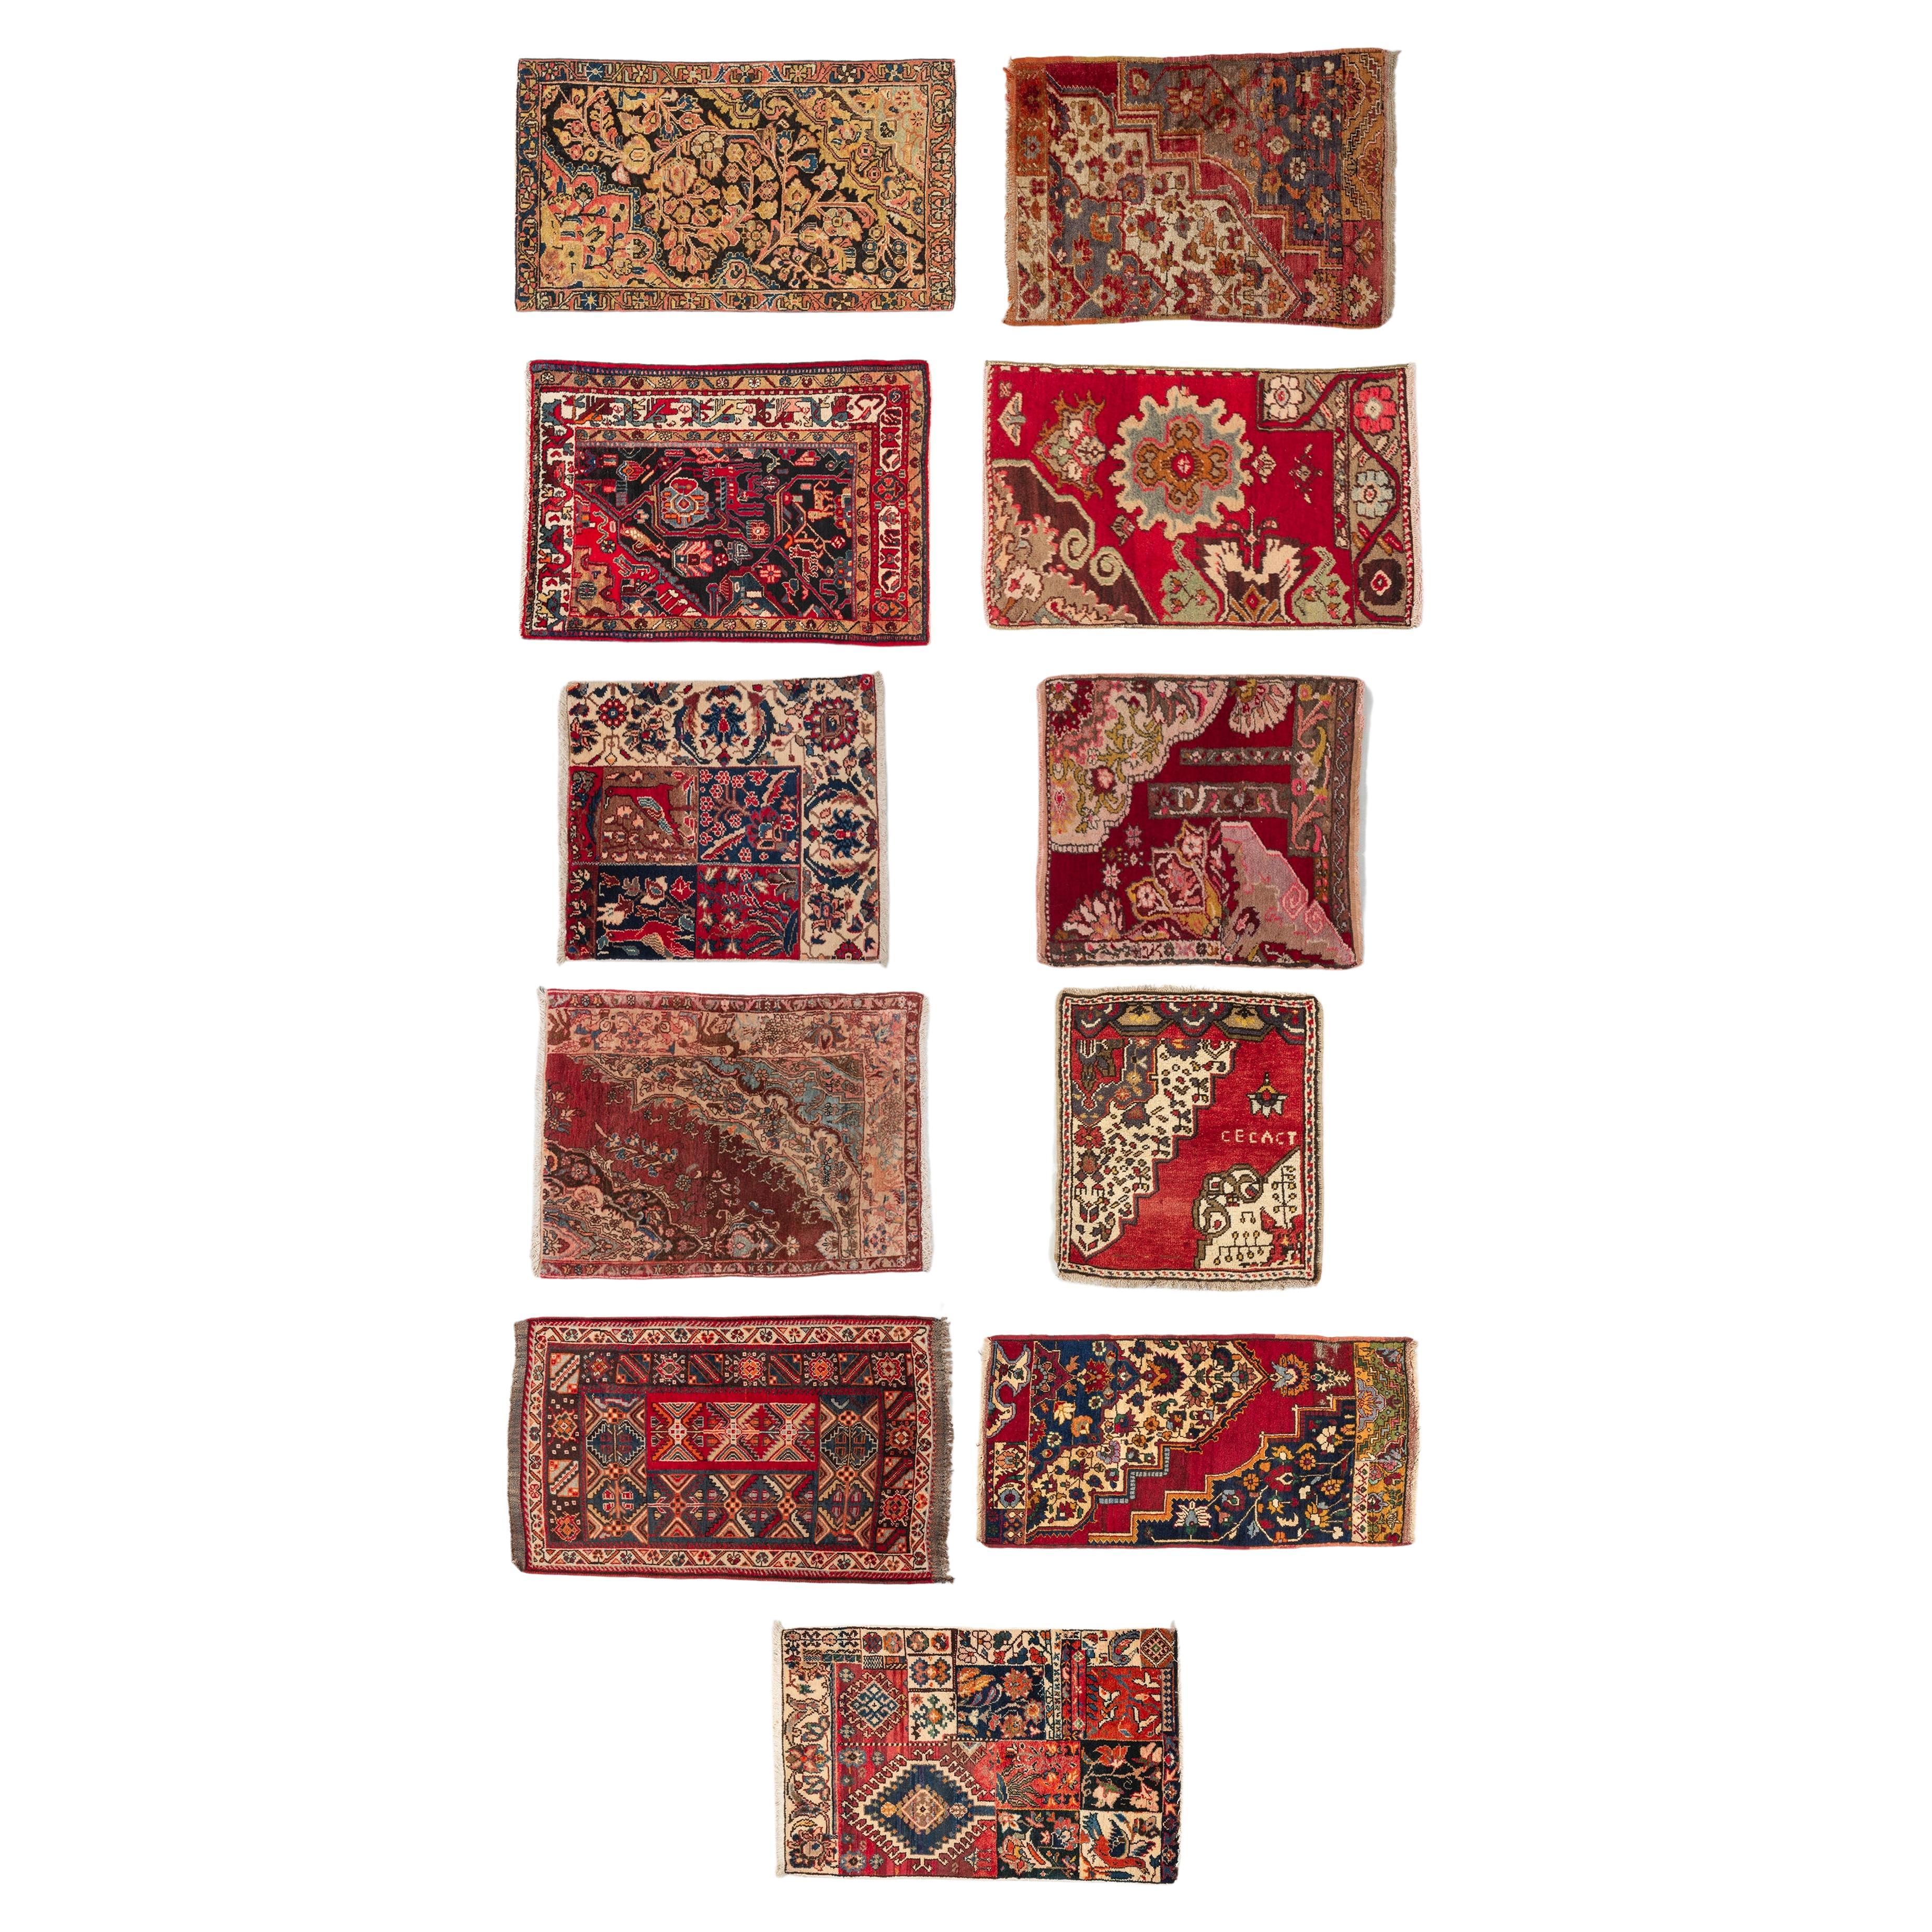 Private Collection of Antique "Vaghireh" Samples of Rugs For Sale